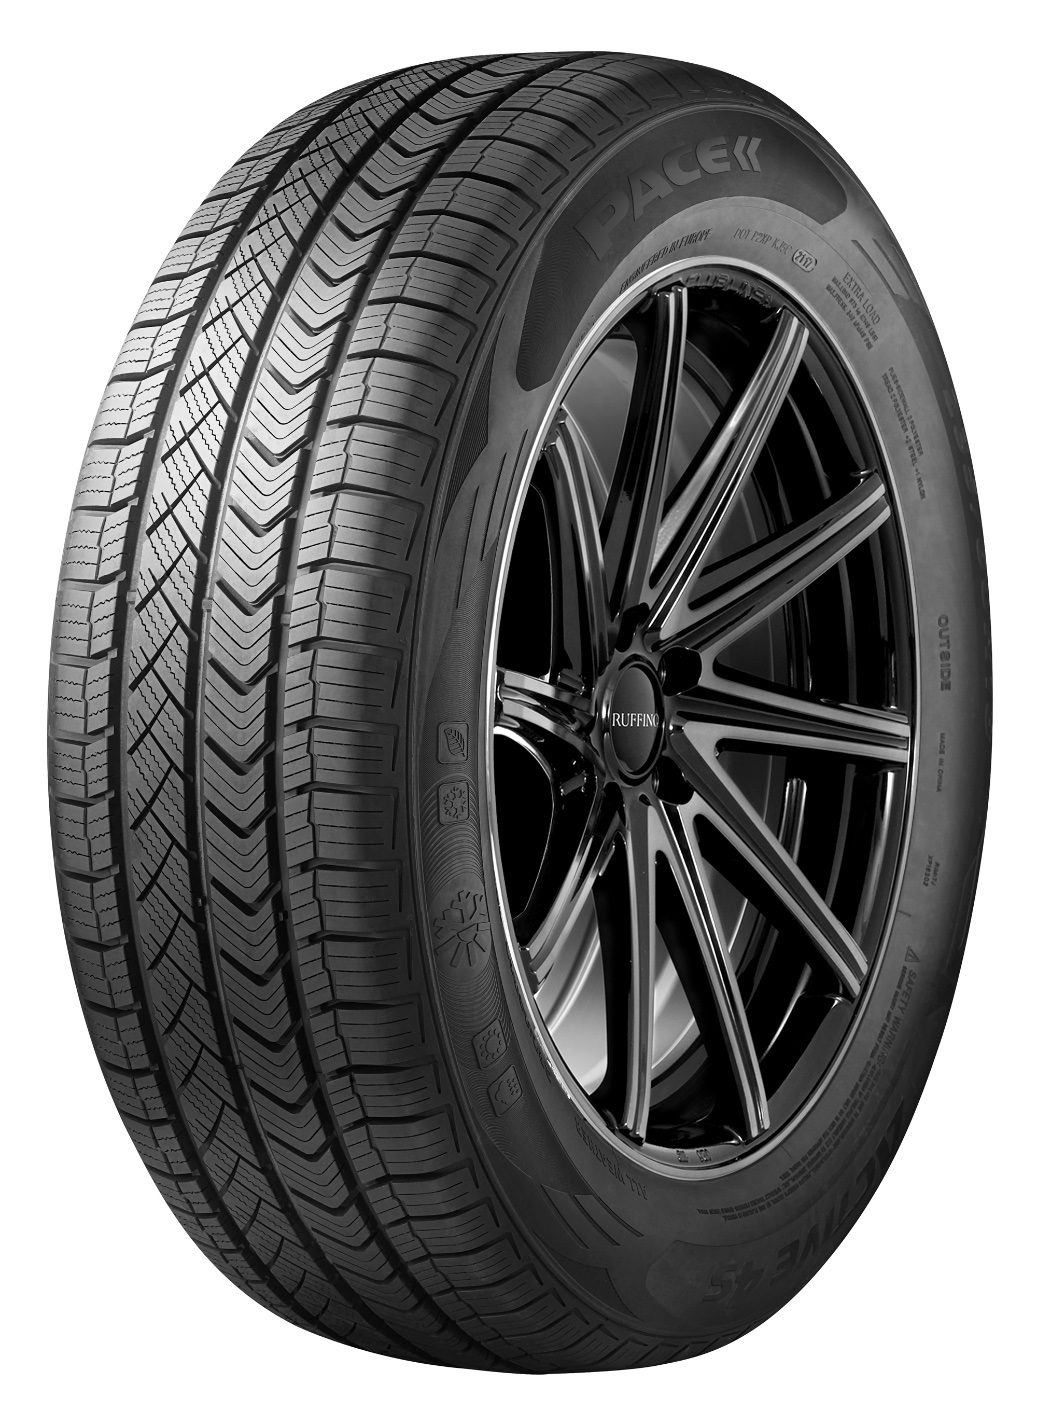 Gomme Nuove Pace 175/65 R14 82T ACTIVE 4S M+S pneumatici nuovi All Season